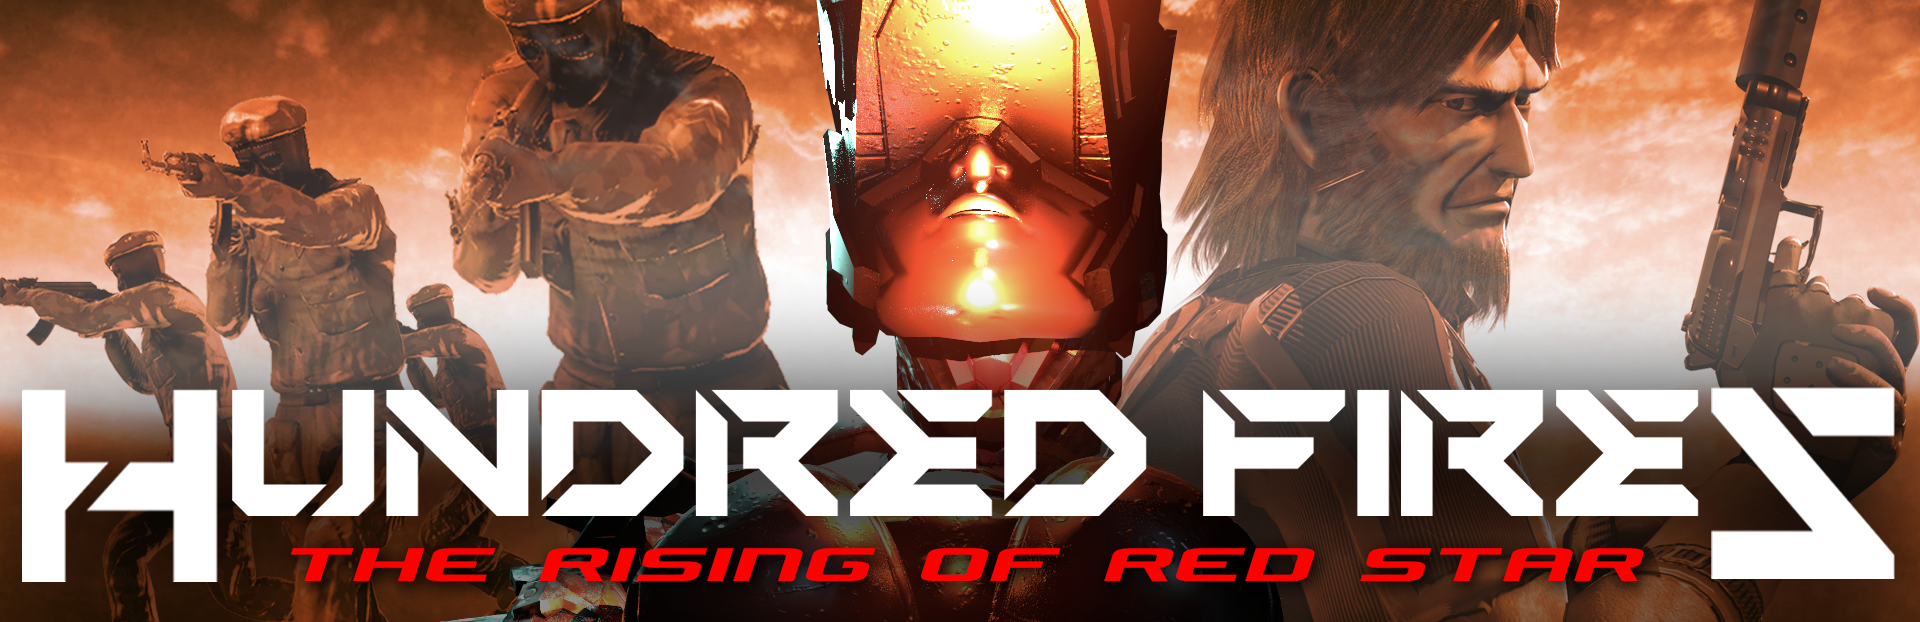 Hundred Fires: The rising of red star - COMPLETE EDITION